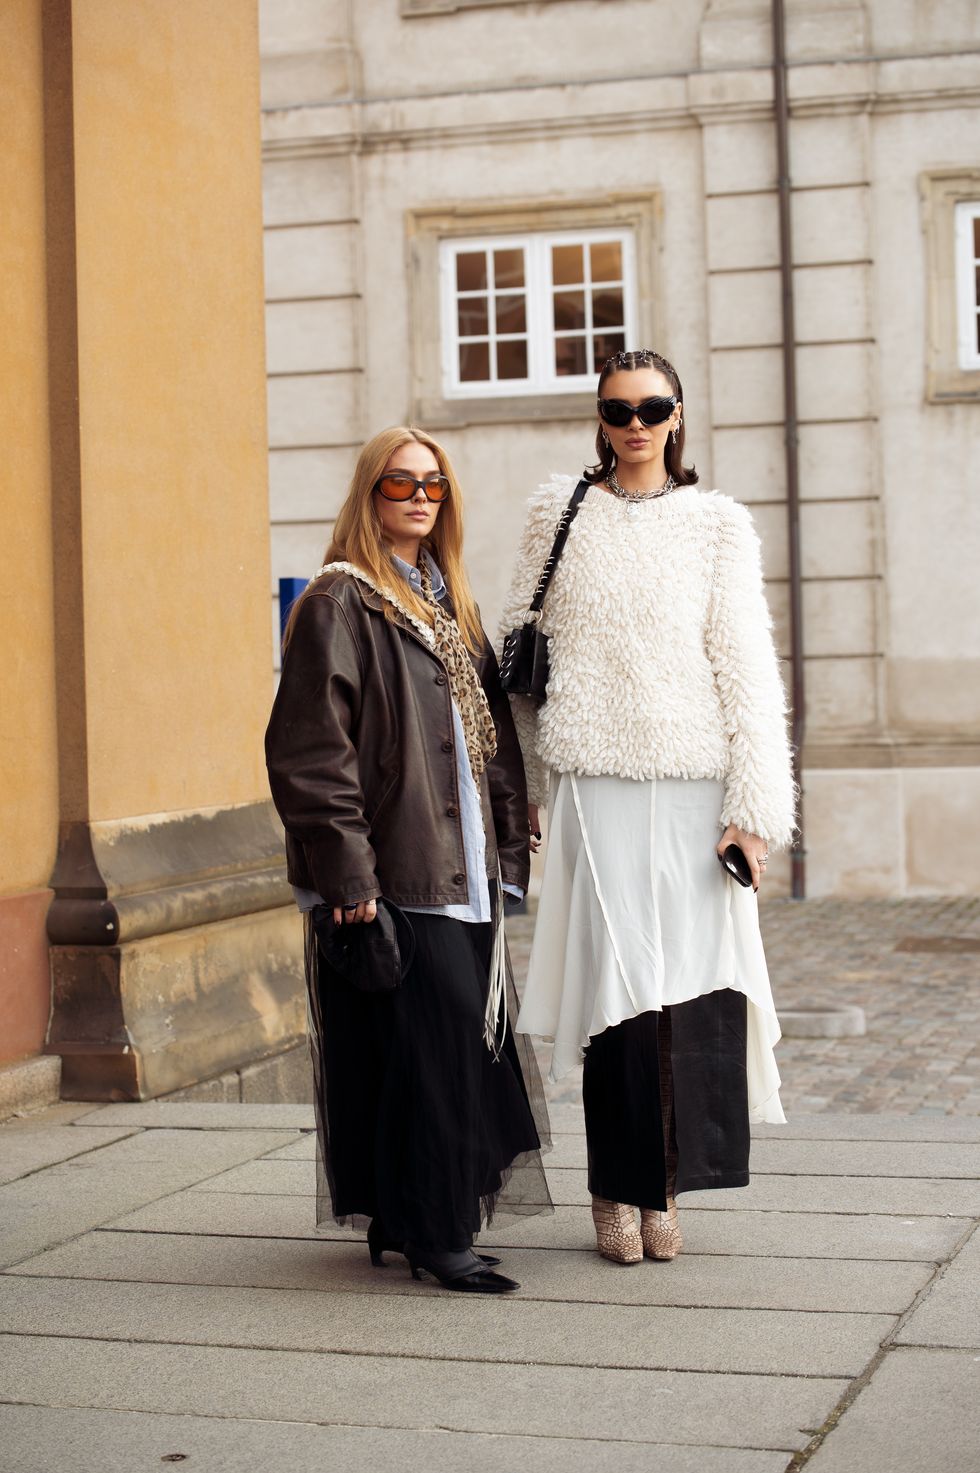 copenhagen, denmark january 29 a guest is wearing a long black tule skirt, brown leather jacket, and orange sunglasses and a guest is wearing a long black leather skirt and white tule dress, and white sweater on top during the copenhagen fashion week aw24 on january 29, 2024 in copenhagen, denmark photo by raimonda kulikauskienegetty images